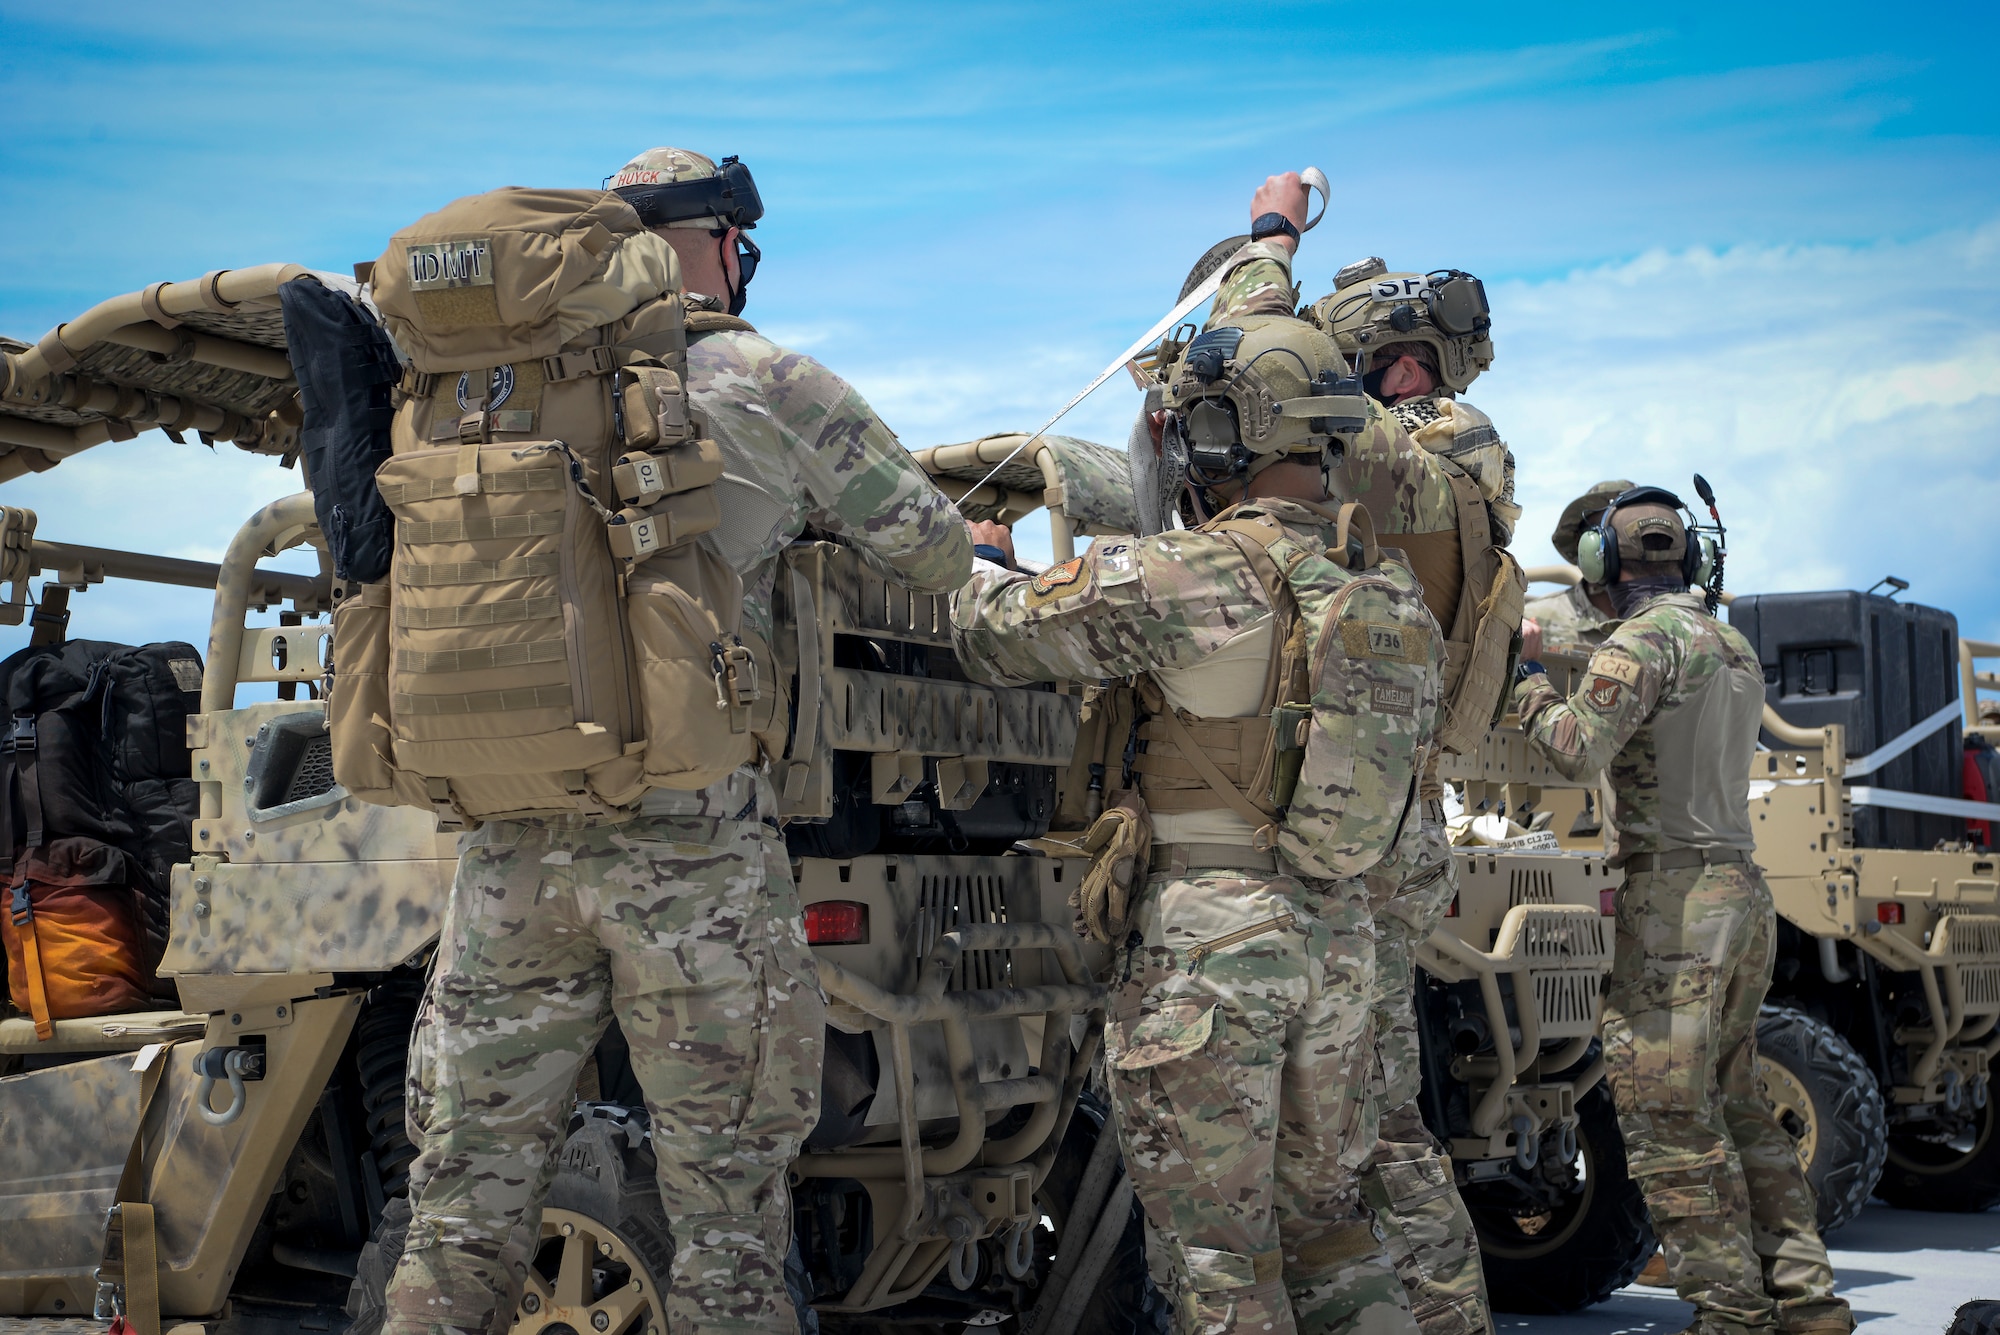 U.S. Air Force Airmen assigned to the 36th Contingency Response Group, unload training gear during a field training exercise on Wake Island, Western Pacific, April 2, 2021.